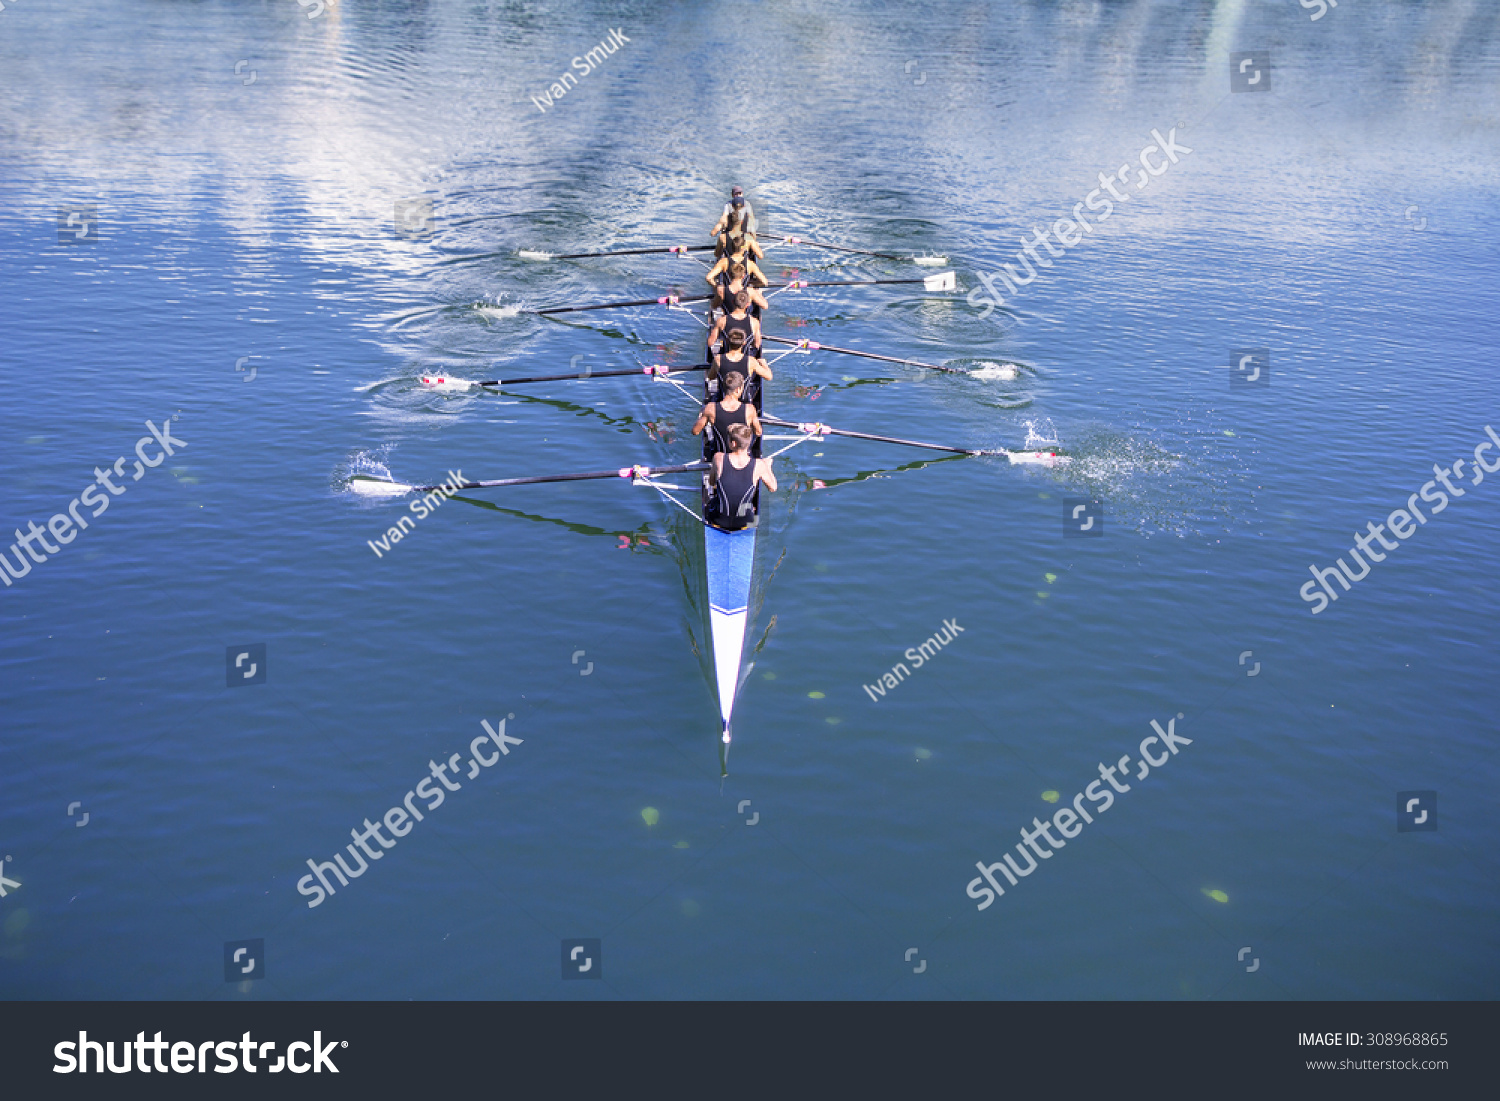 Rowers in eight-oar rowing boats on the tranquil lake #308968865